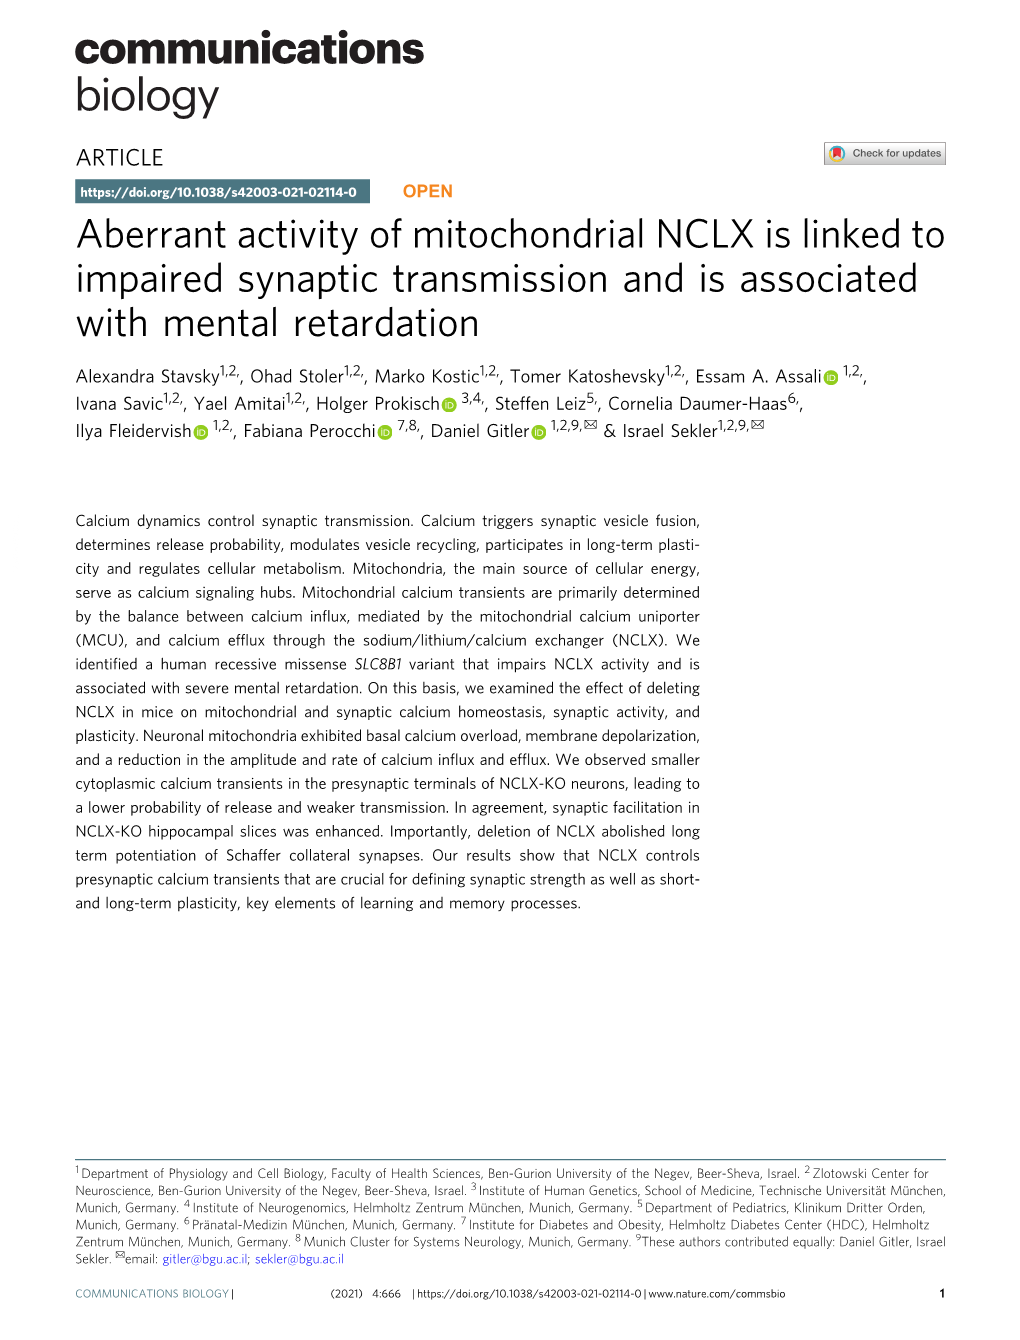 Aberrant Activity of Mitochondrial NCLX Is Linked to Impaired Synaptic Transmission and Is Associated with Mental Retardation